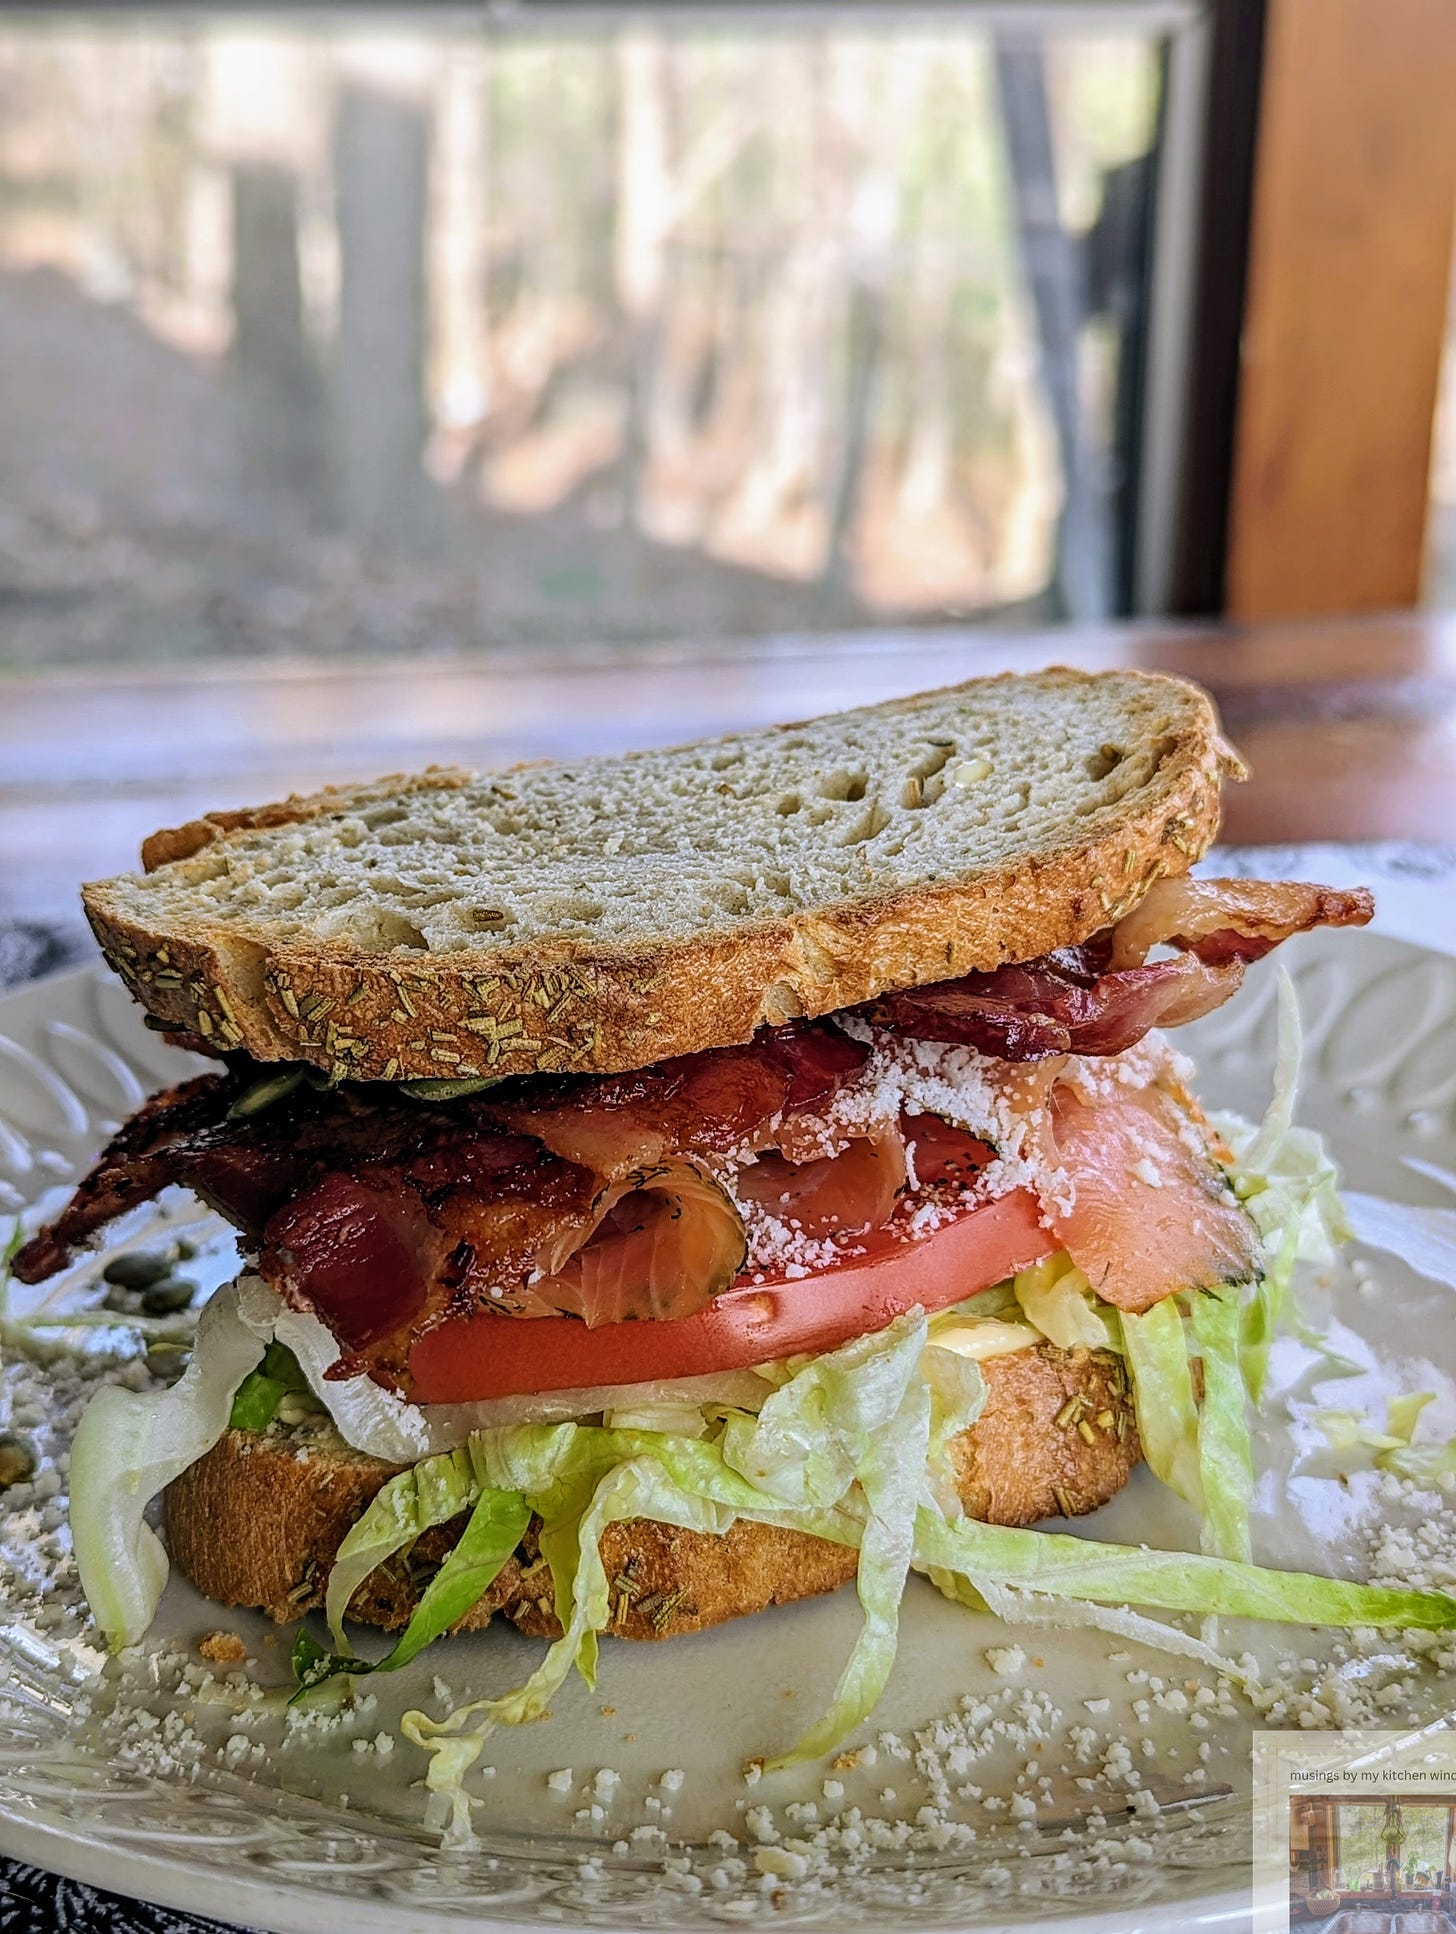 A juicy BLT is stacked high with lettuce, tomato, and bacon between toasted rosemary bread.